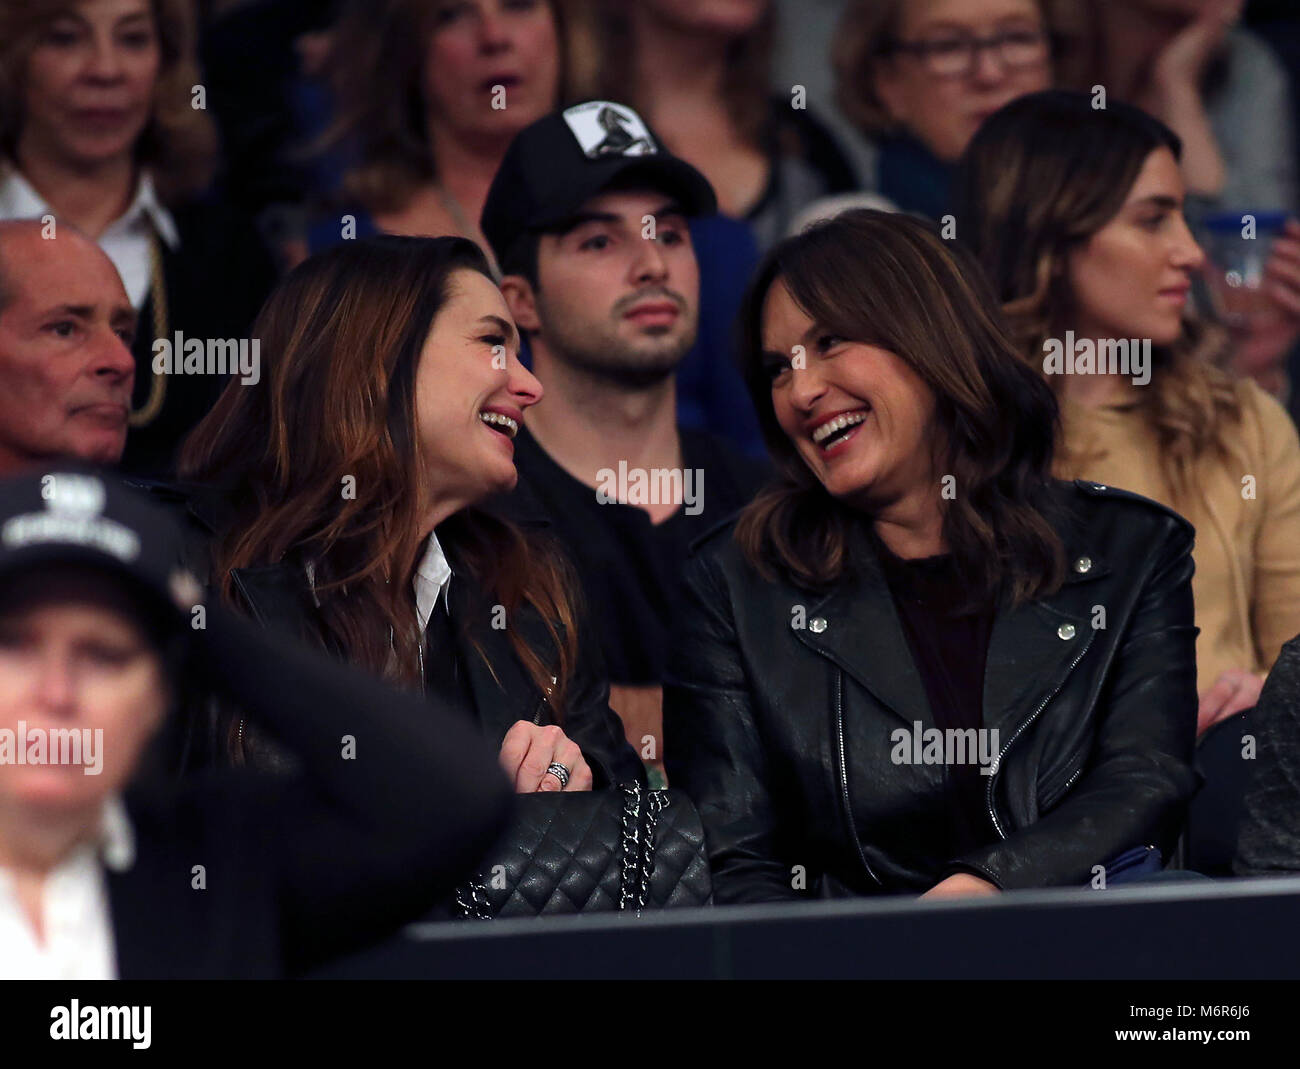 New York, USA. 5th March, 2018. Brooke Shields and Mariska Hargitay share a laugh at court side during the Tie Break Tens tennis tournament at Madison Square Garden in New York. The tournament features eight of the tours top female players competing for a $250,000 winners prize. Credit: Adam Stoltman/Alamy Live News Stock Photo